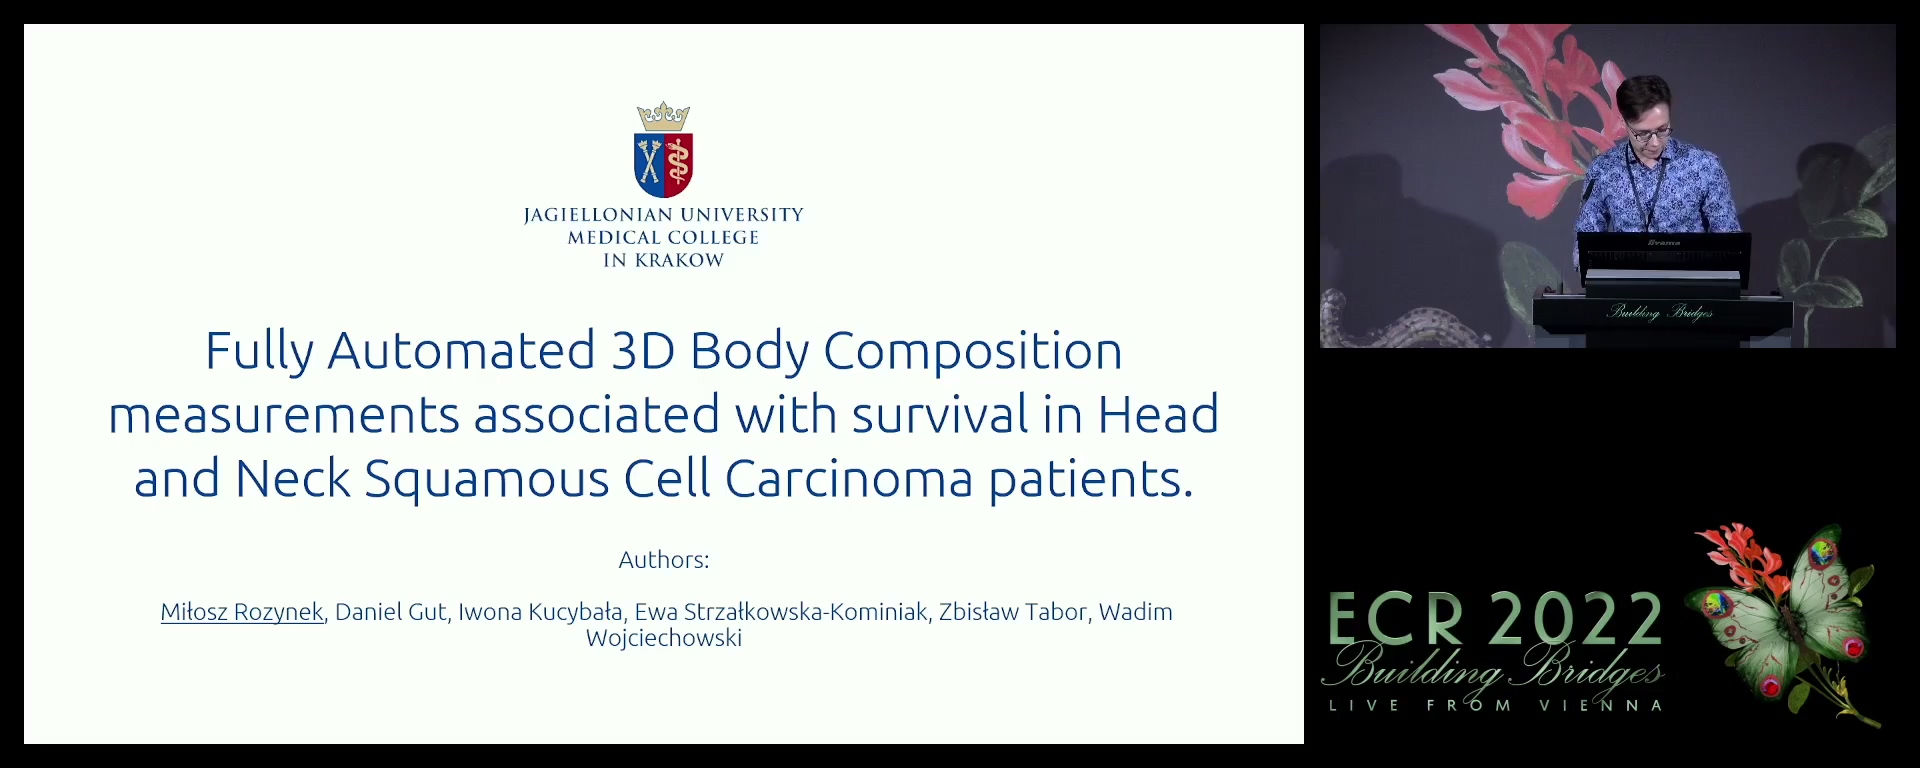 Fully Automated 3D Body Composition measurements associated with survival in Head and Neck Squamous Cell Carcinoma patients. - Miłosz Rozynek, Krakow / PL